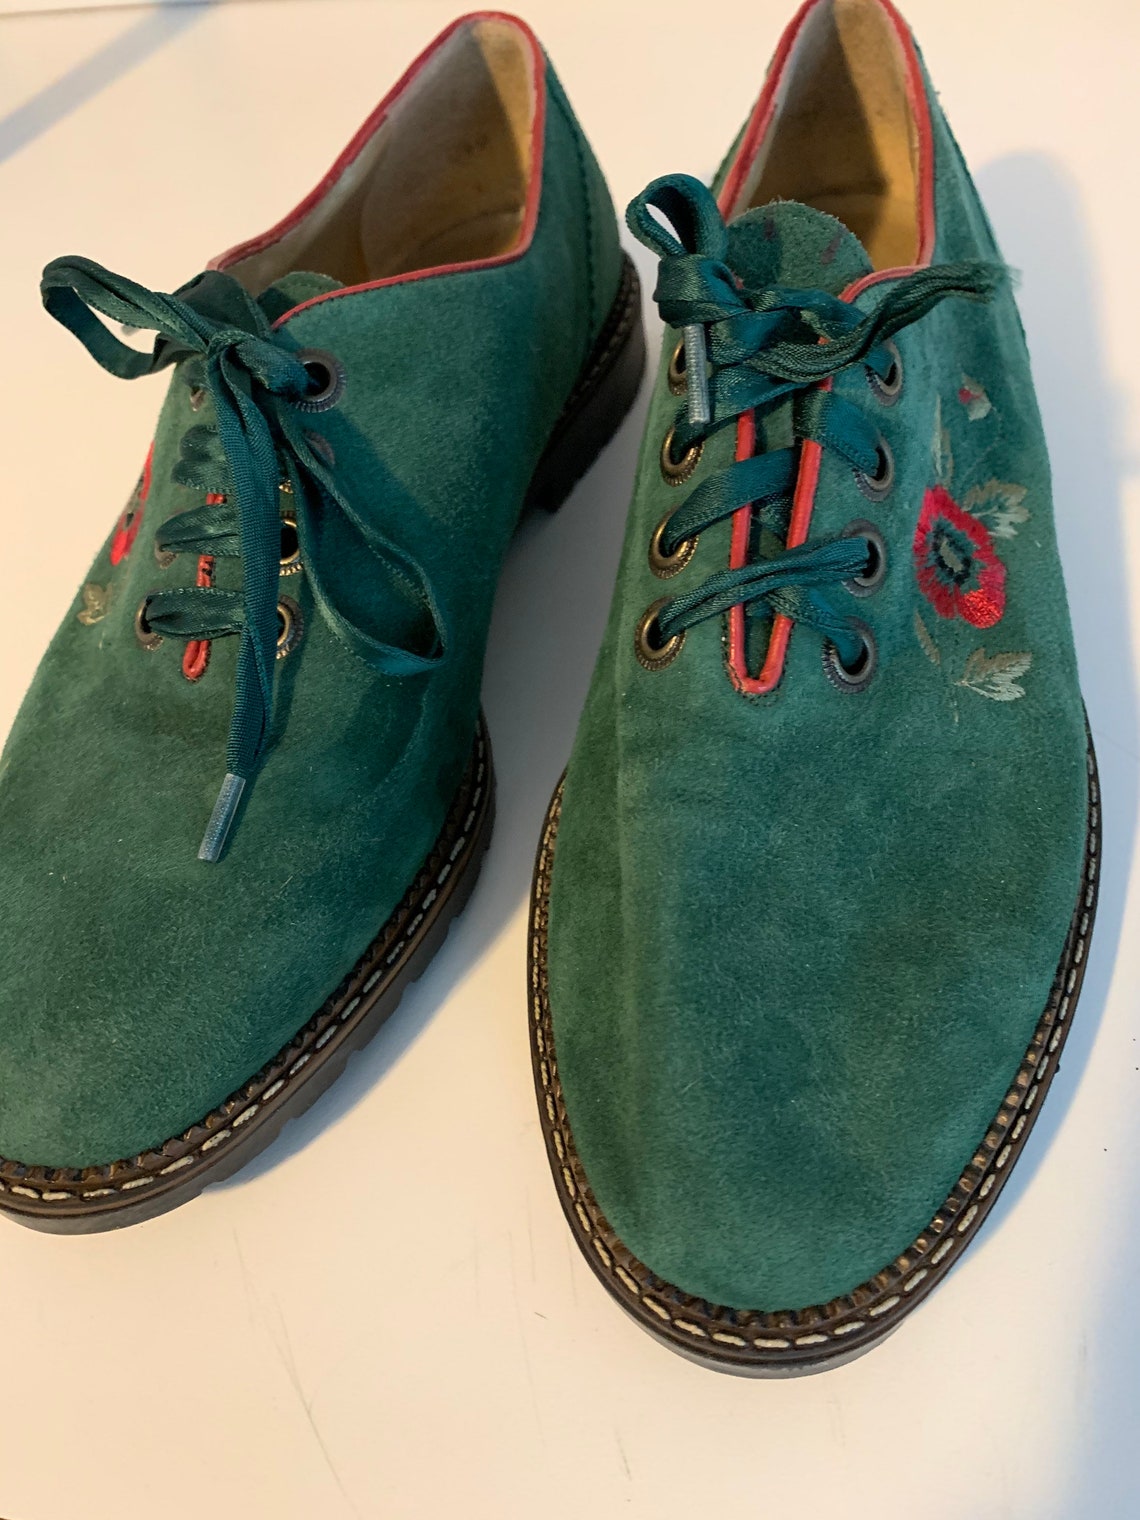 Vintage Walter Käfer Design Green Oxford Shoes with | Etsy